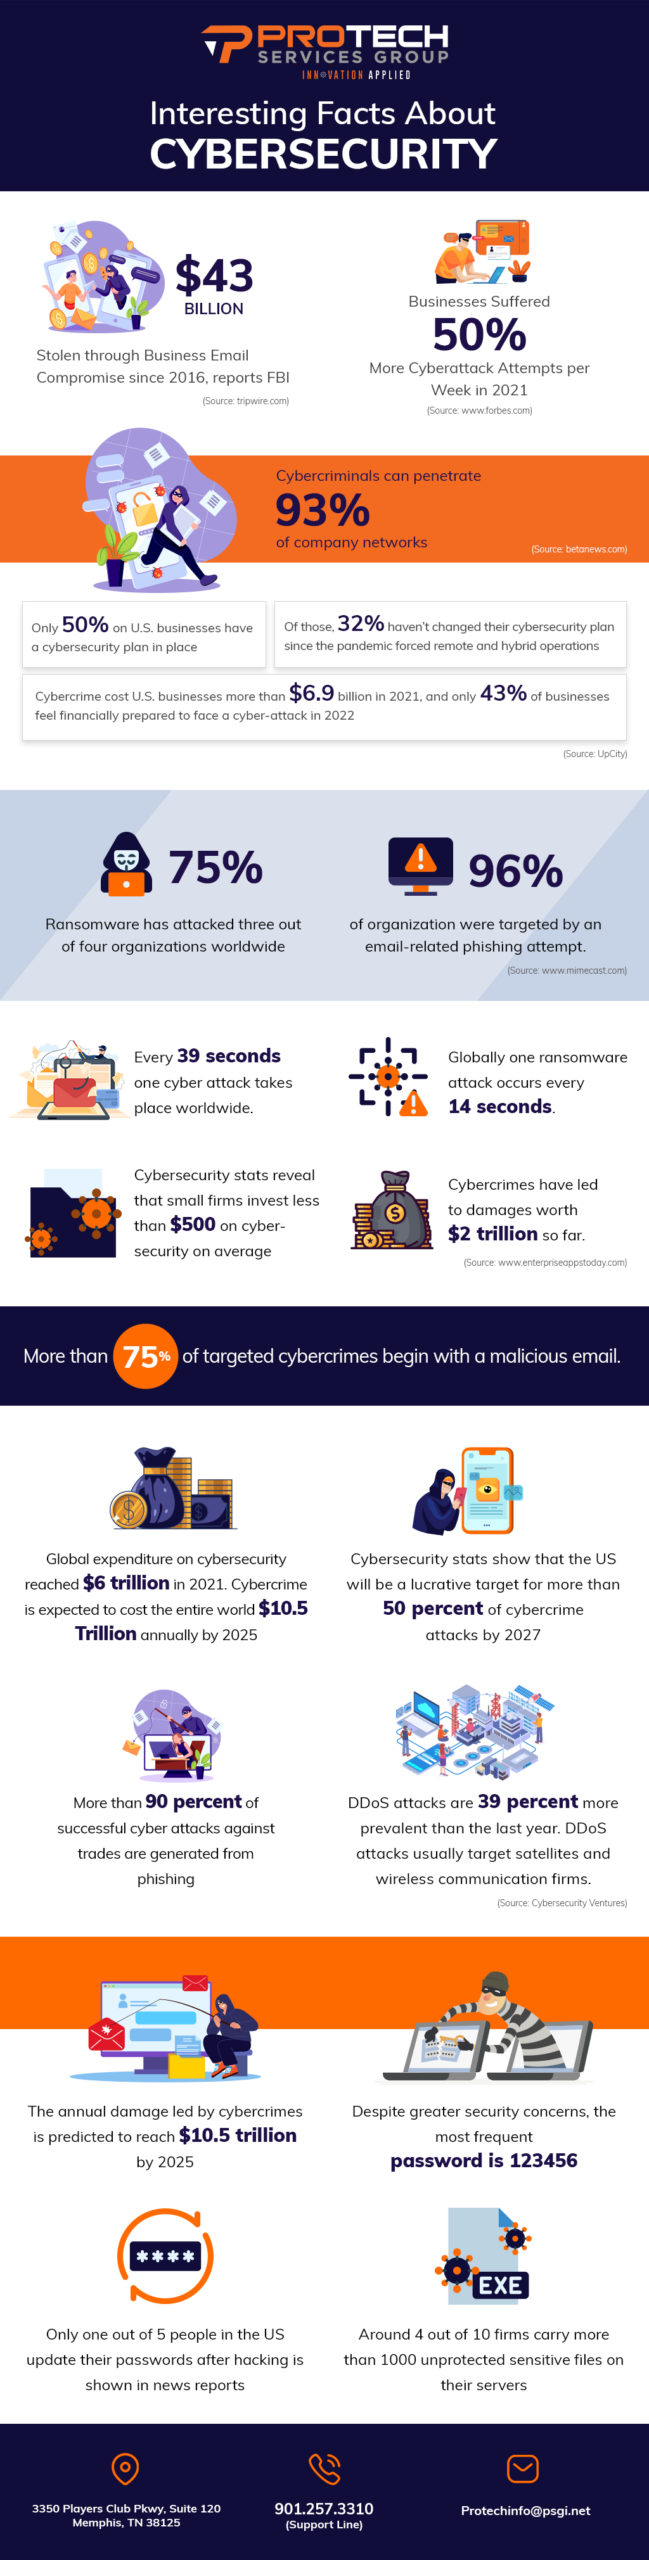 Facts About Cybersecurity 